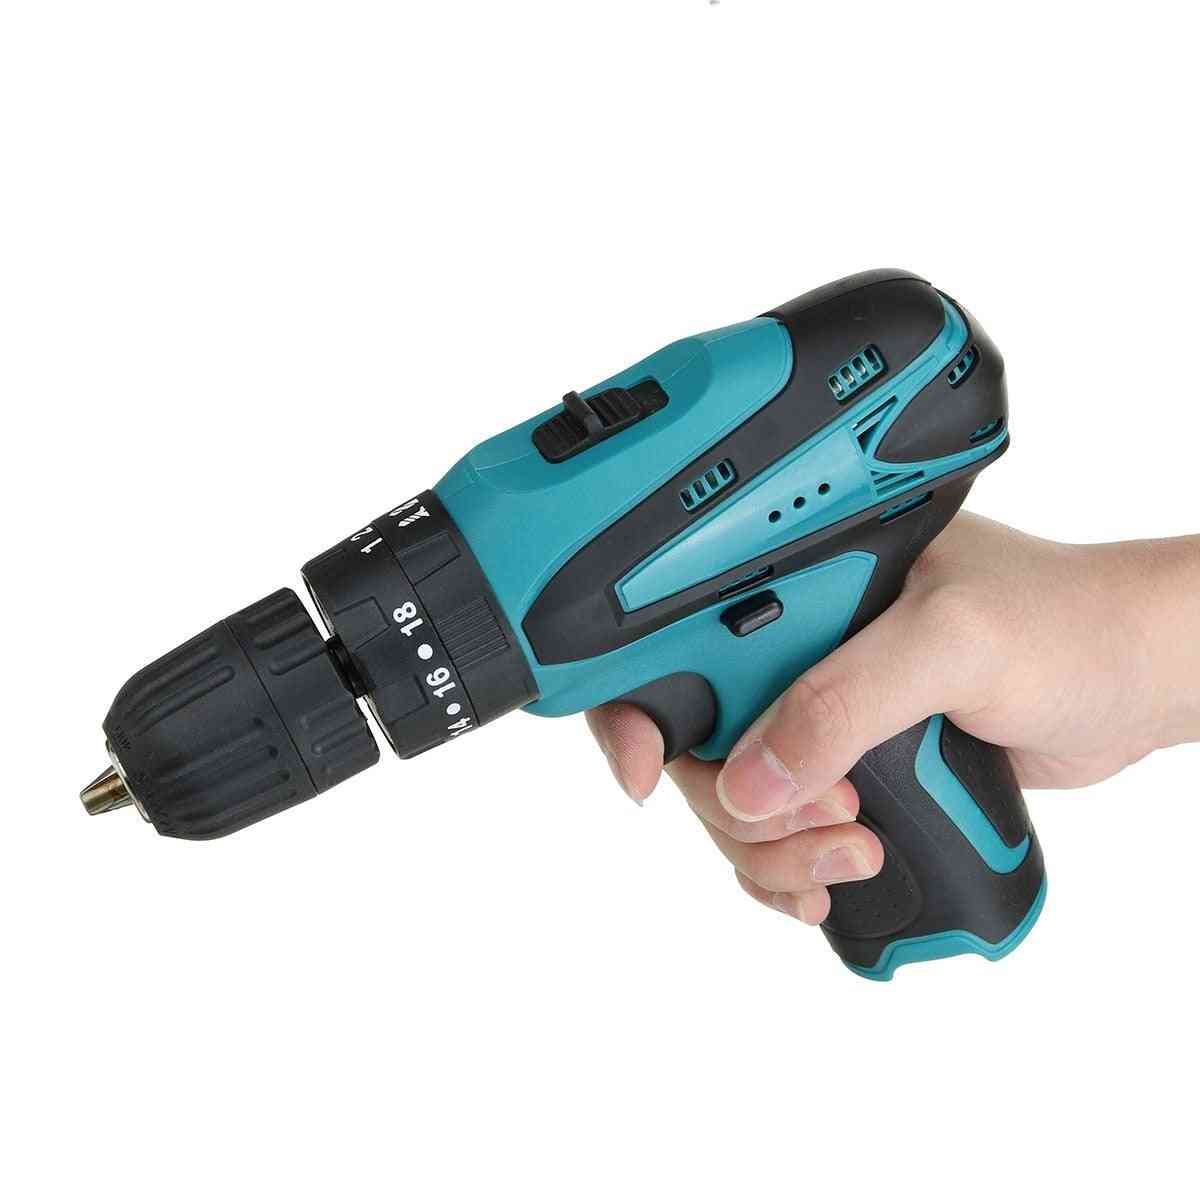 Drillpro Electric Cordless Drill